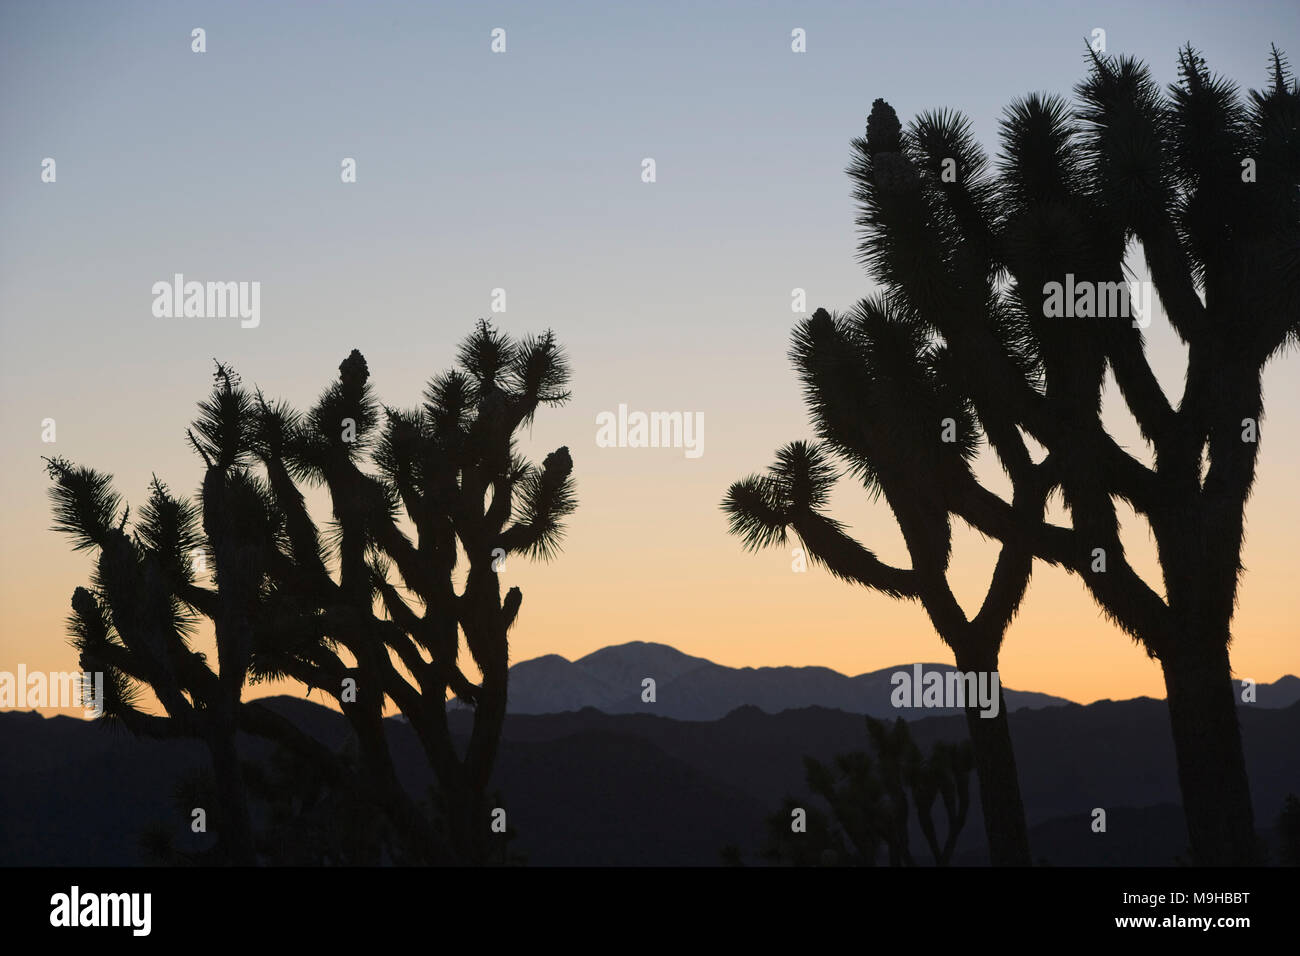 Sunset over the mountains in Joshua tree national Park in Southern California's Mojave desert with weirdly form Joshua trees in the foreground Stock Photo